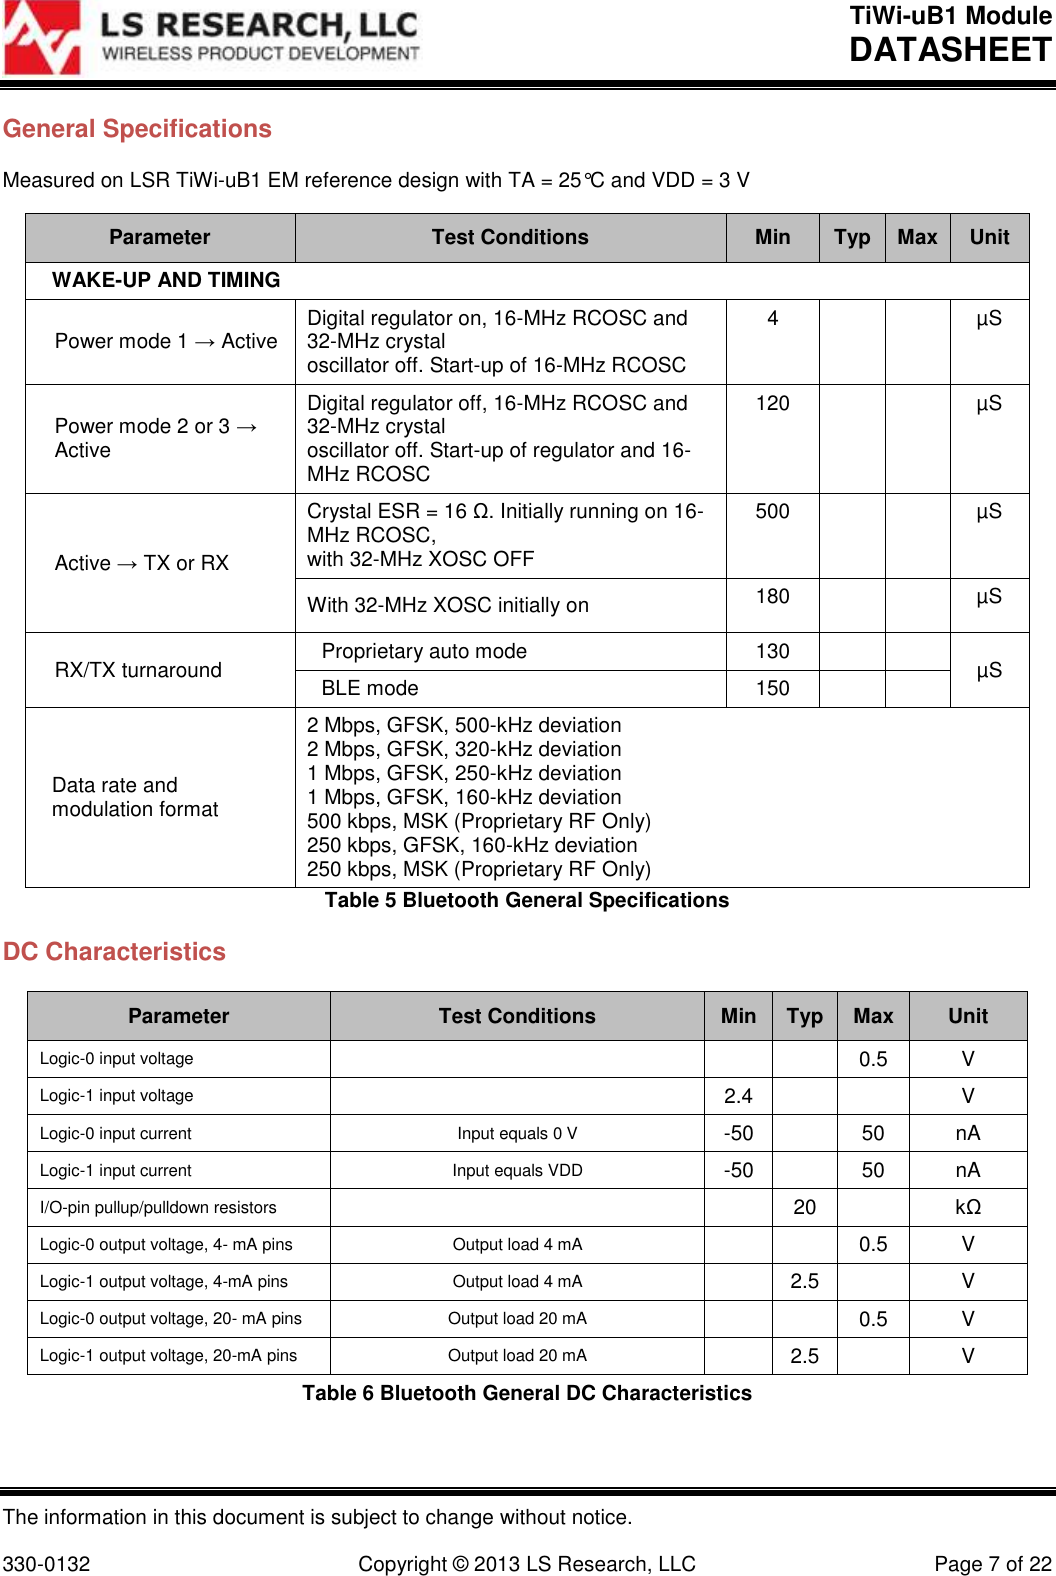 TiWi-uB1 Module DATASHEET  The information in this document is subject to change without notice.  330-0132  Copyright © 2013 LS Research, LLC  Page 7 of 22 General Specifications Measured on LSR TiWi-uB1 EM reference design with TA = 25°C and VDD = 3 V Parameter Test Conditions Min Typ Max Unit WAKE-UP AND TIMING Power mode 1 → Active Digital regulator on, 16-MHz RCOSC and 32-MHz crystal oscillator off. Start-up of 16-MHz RCOSC 4   µS Power mode 2 or 3 → Active Digital regulator off, 16-MHz RCOSC and 32-MHz crystal oscillator off. Start-up of regulator and 16-MHz RCOSC 120   µS Active → TX or RX Crystal ESR = 16 Ω. Initially running on 16-MHz RCOSC, with 32-MHz XOSC OFF 500   µS With 32-MHz XOSC initially on 180   µS RX/TX turnaround Proprietary auto mode 130   µS BLE mode 150   Data rate and modulation format 2 Mbps, GFSK, 500-kHz deviation 2 Mbps, GFSK, 320-kHz deviation 1 Mbps, GFSK, 250-kHz deviation 1 Mbps, GFSK, 160-kHz deviation 500 kbps, MSK (Proprietary RF Only) 250 kbps, GFSK, 160-kHz deviation 250 kbps, MSK (Proprietary RF Only) Table 5 Bluetooth General Specifications DC Characteristics Parameter Test Conditions Min Typ Max Unit Logic-0 input voltage    0.5 V Logic-1 input voltage  2.4   V Logic-0 input current Input equals 0 V -50  50 nA Logic-1 input current Input equals VDD -50  50 nA I/O-pin pullup/pulldown resistors   20  kΩ Logic-0 output voltage, 4- mA pins Output load 4 mA   0.5 V Logic-1 output voltage, 4-mA pins Output load 4 mA  2.5  V Logic-0 output voltage, 20- mA pins Output load 20 mA   0.5 V Logic-1 output voltage, 20-mA pins Output load 20 mA  2.5  V Table 6 Bluetooth General DC Characteristics 